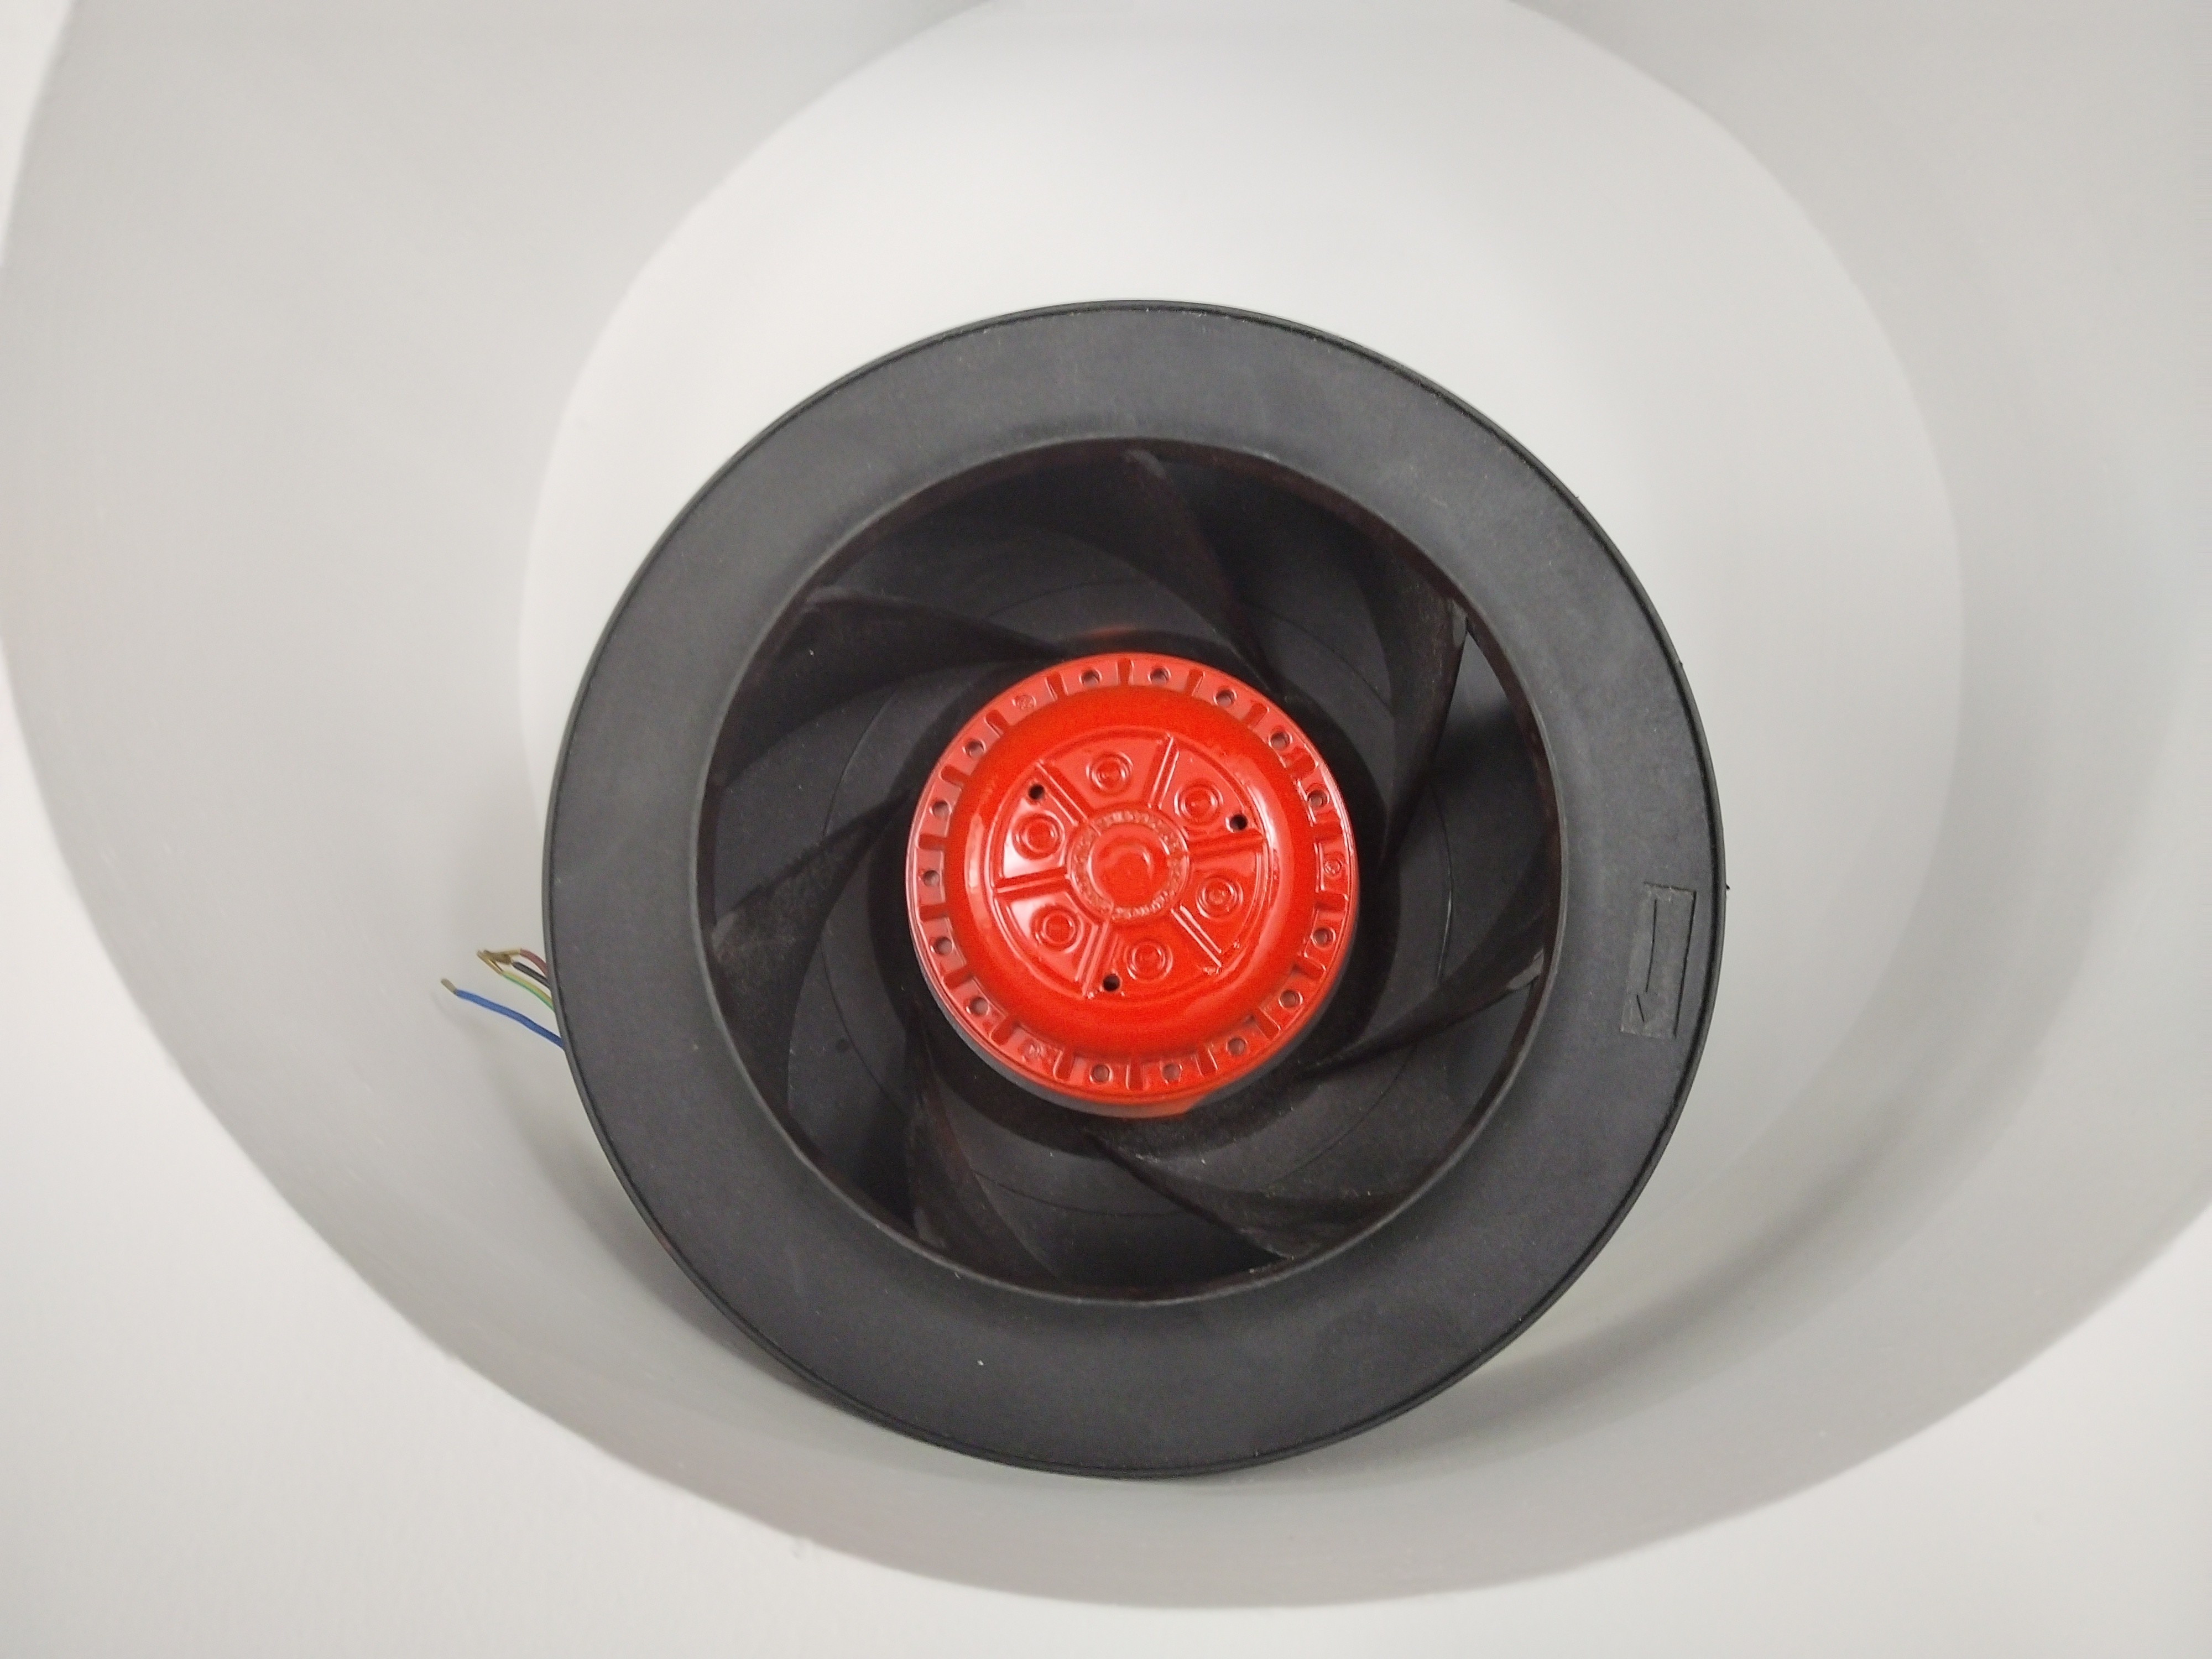  2710 Rpm Centrifugal Fan Backward Curved IP54 With Short Inlet Ring Manufactures